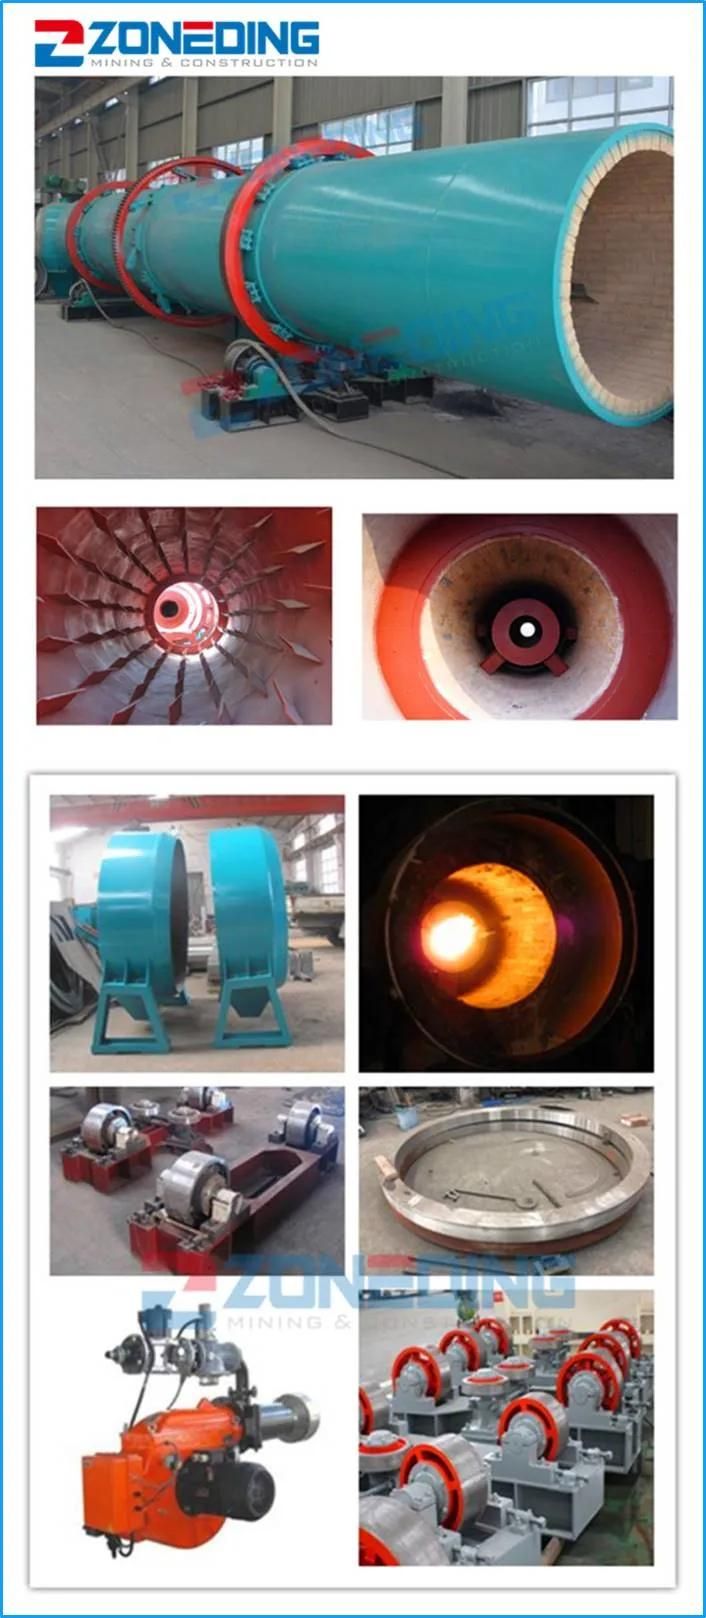 Iron Ore Drying Rotary Dryer for Mining Drying Process Drum Dryer